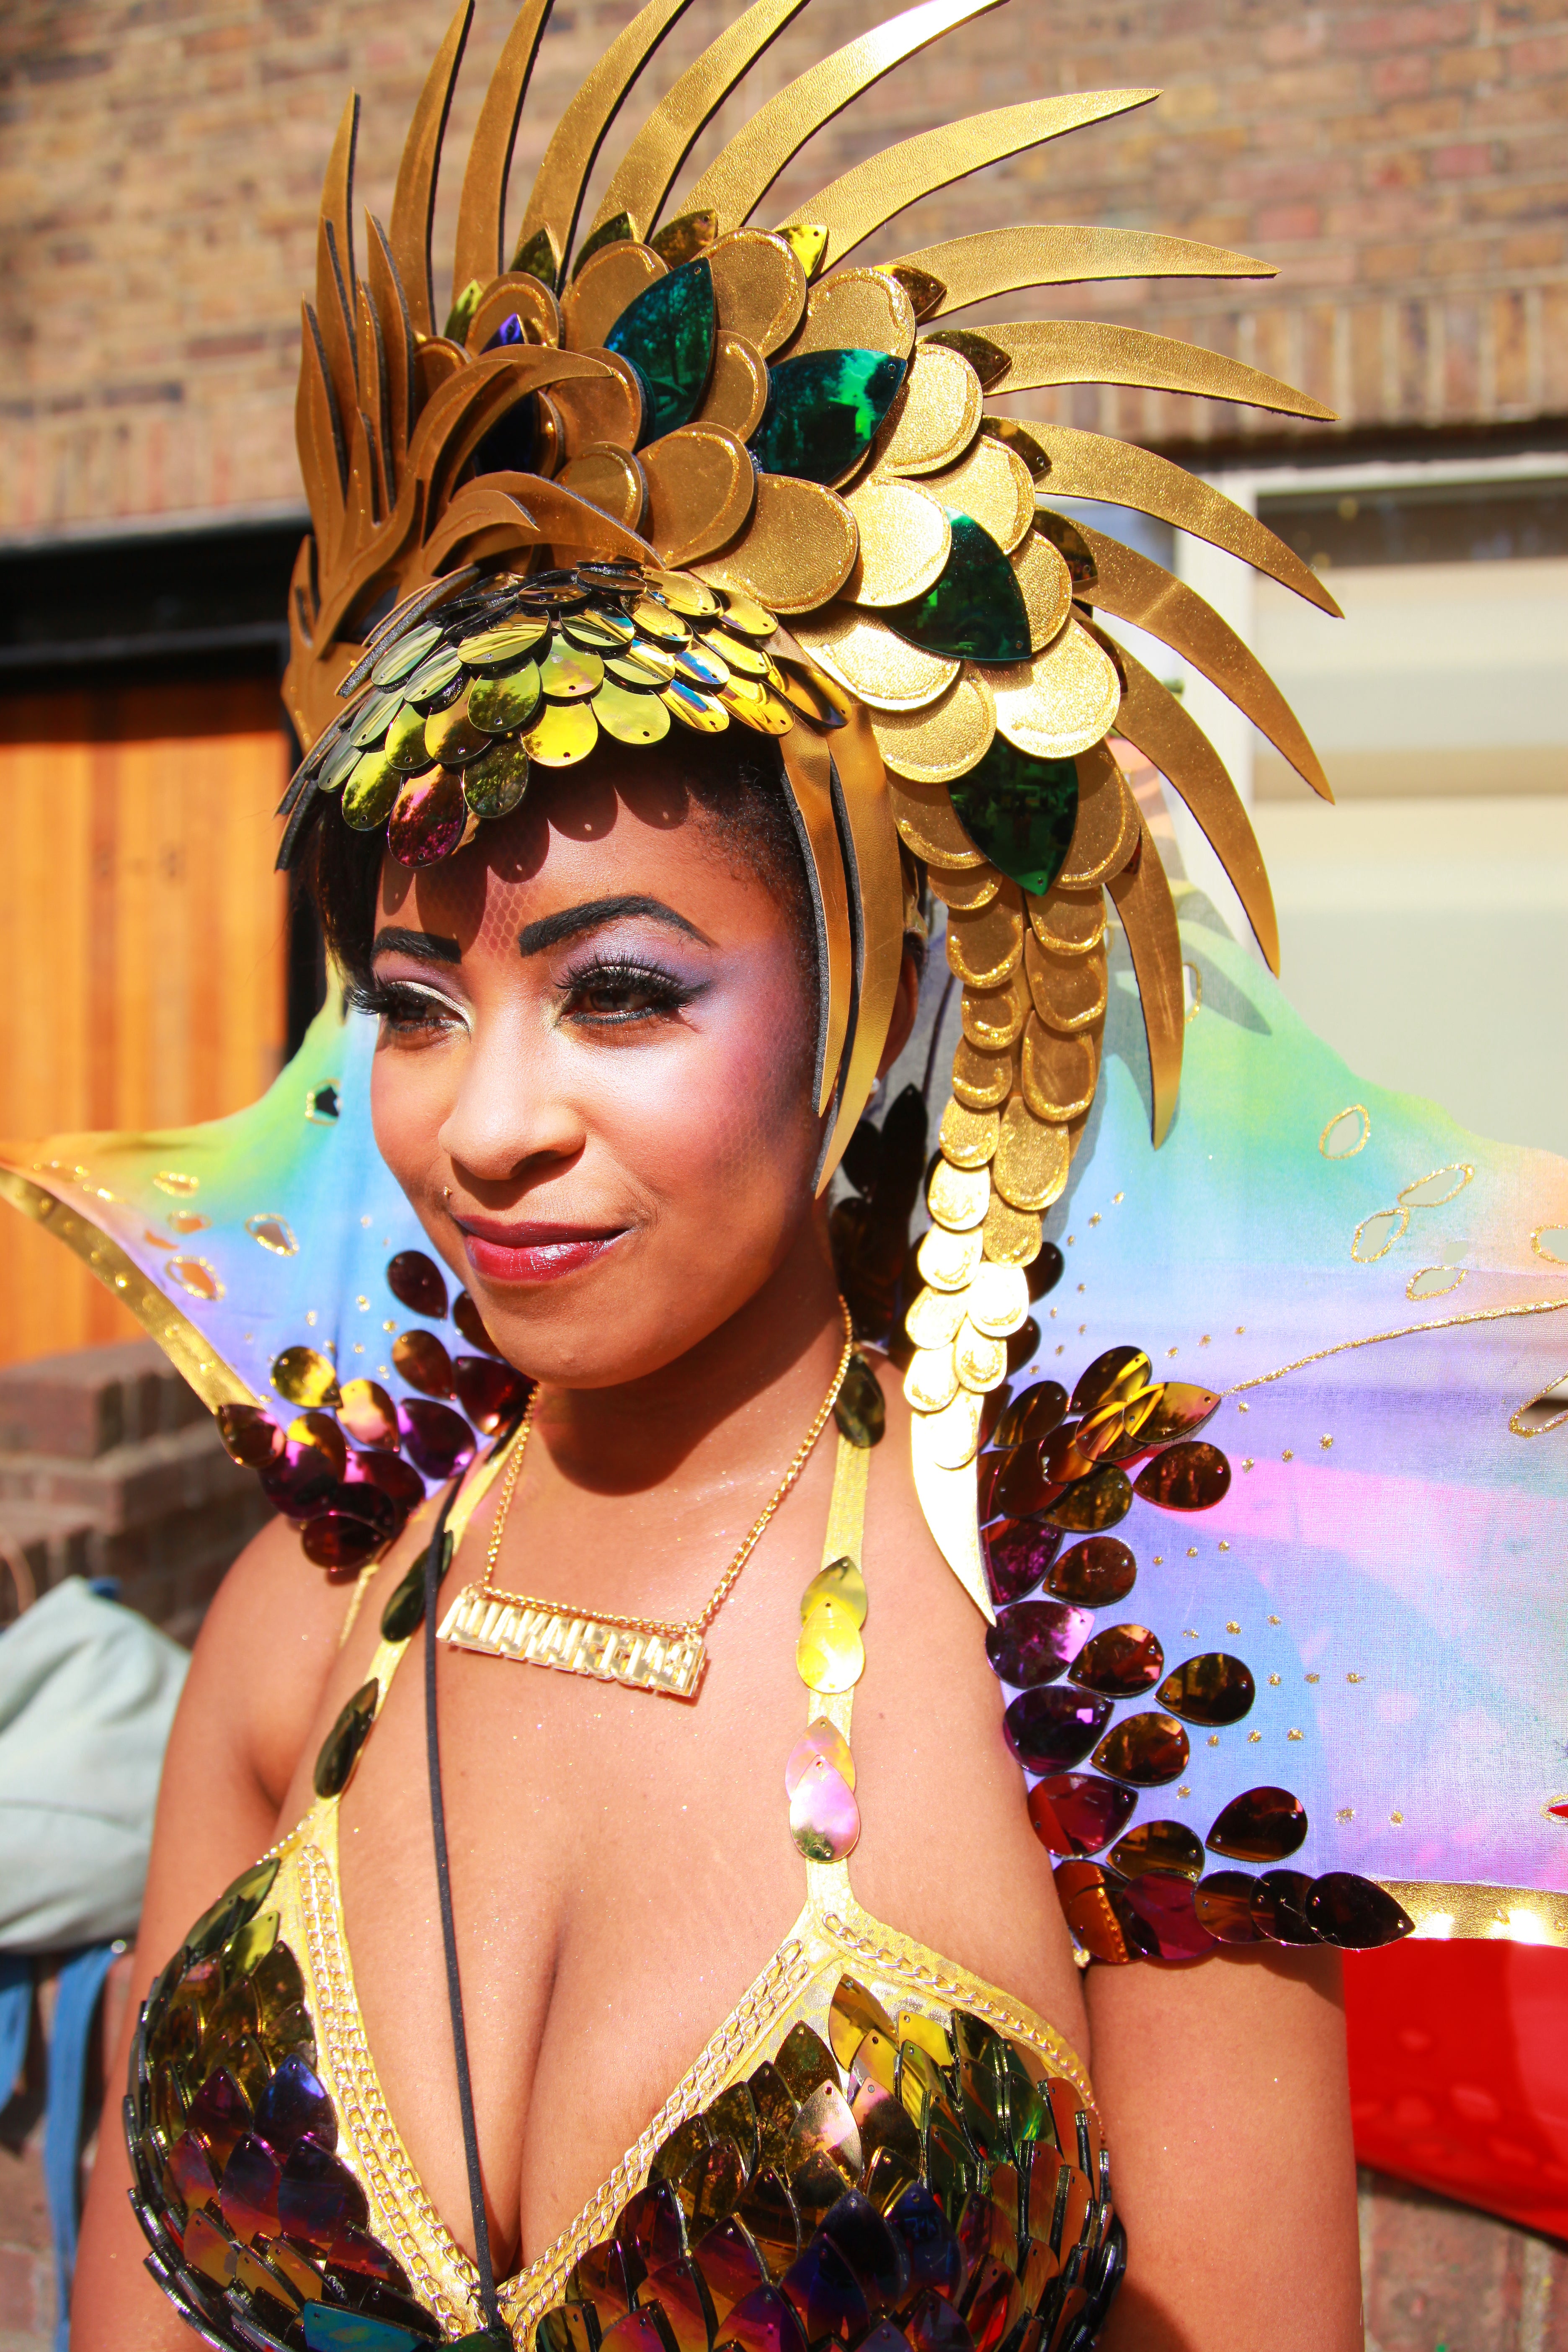 Brits Live It Up at the Notting Hill Carnival